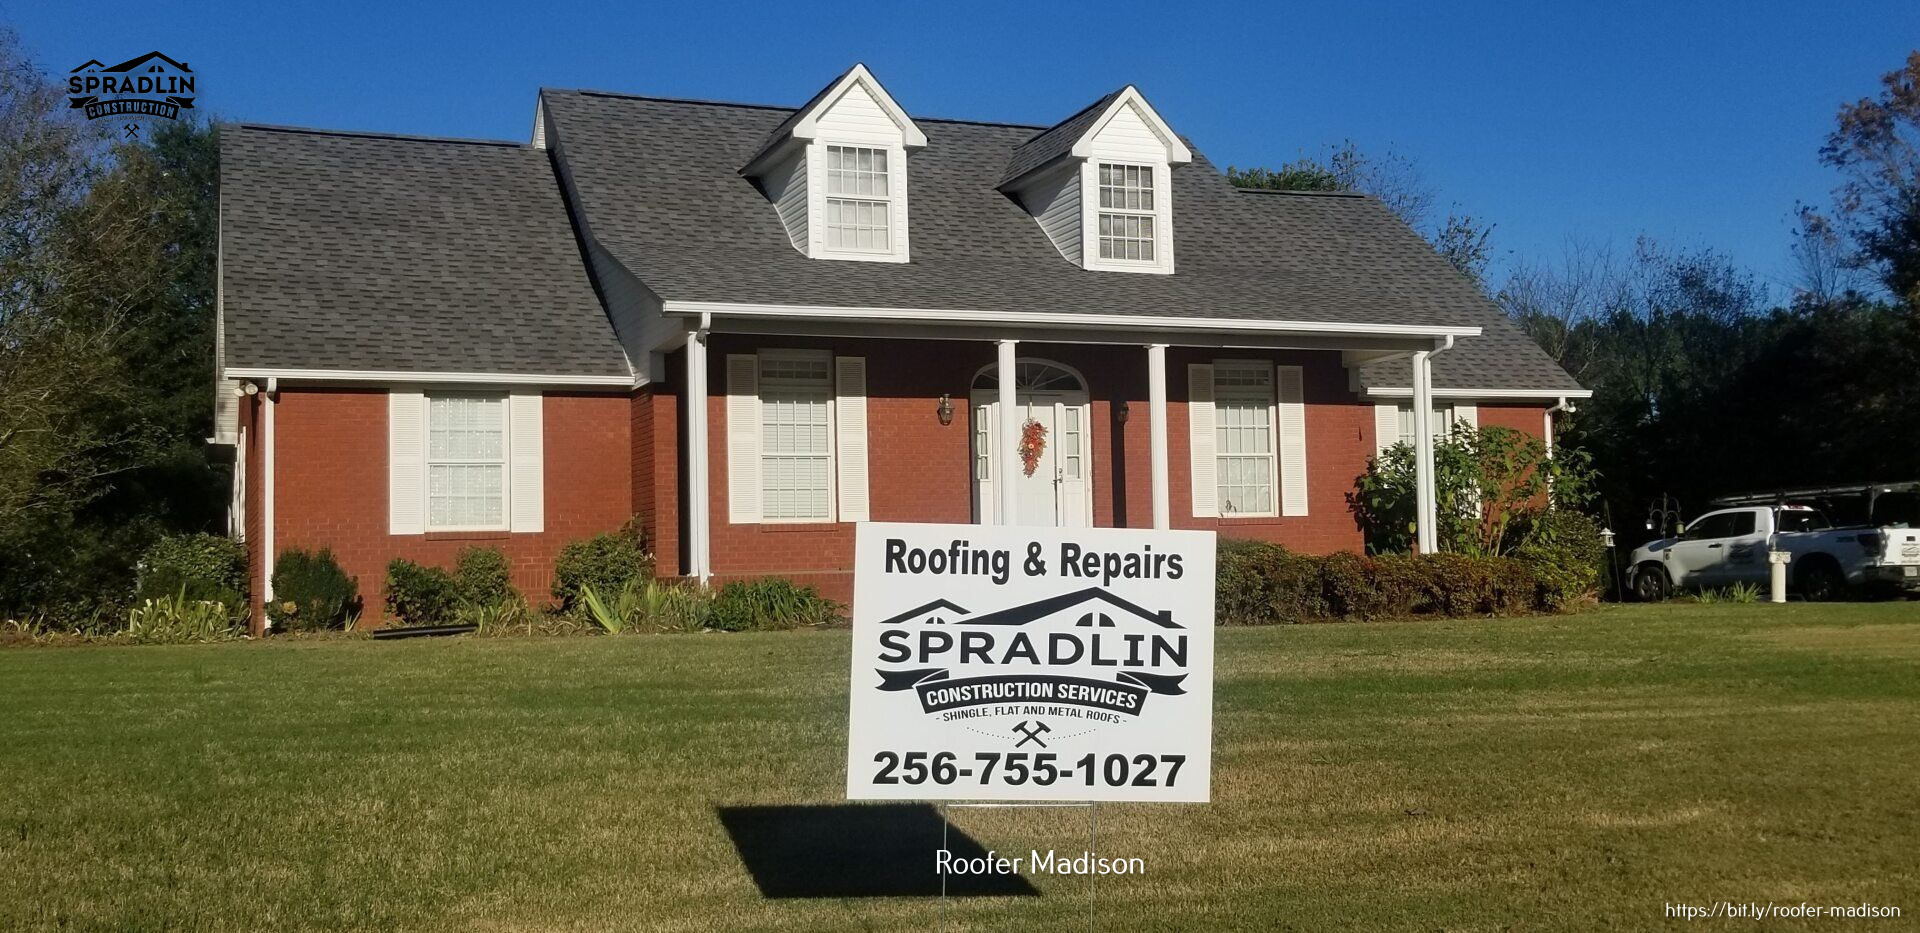 Spradlin Construction is the choice for commercial and residential roofer in Madison, AL